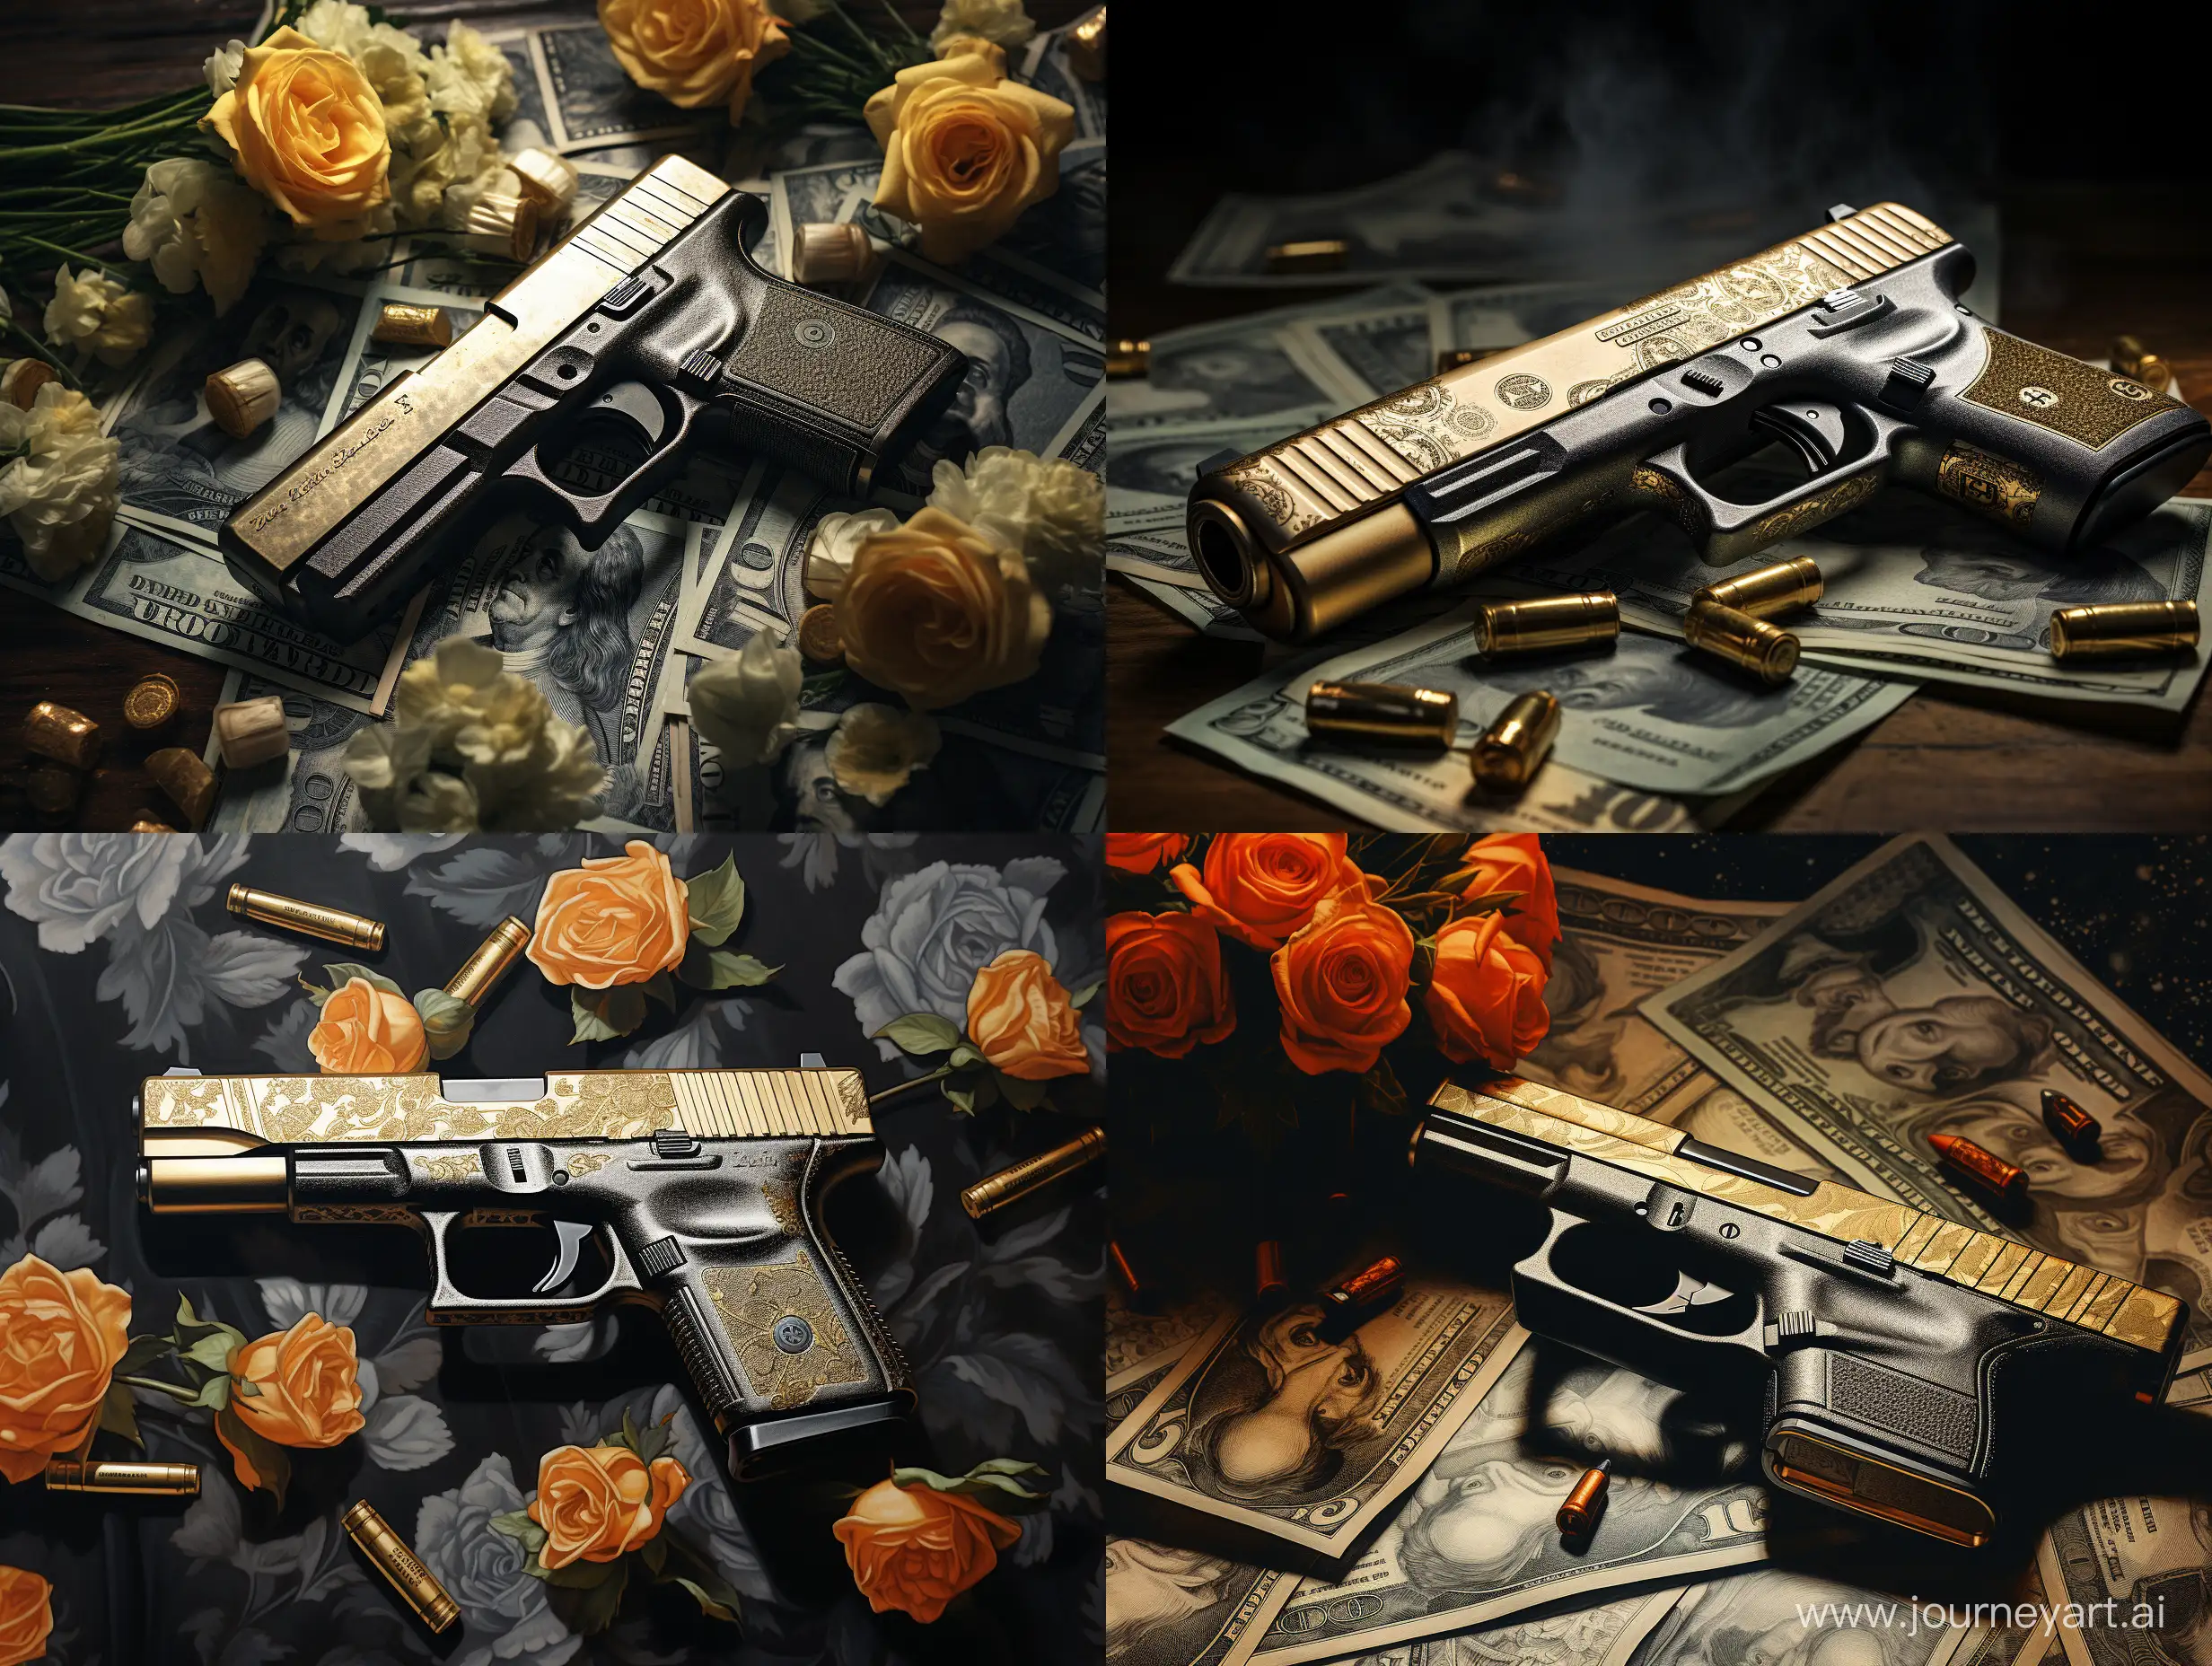 Luxurious-Golden-Glock-19-with-Elegant-Floral-Etchings-and-Scattered-Cash